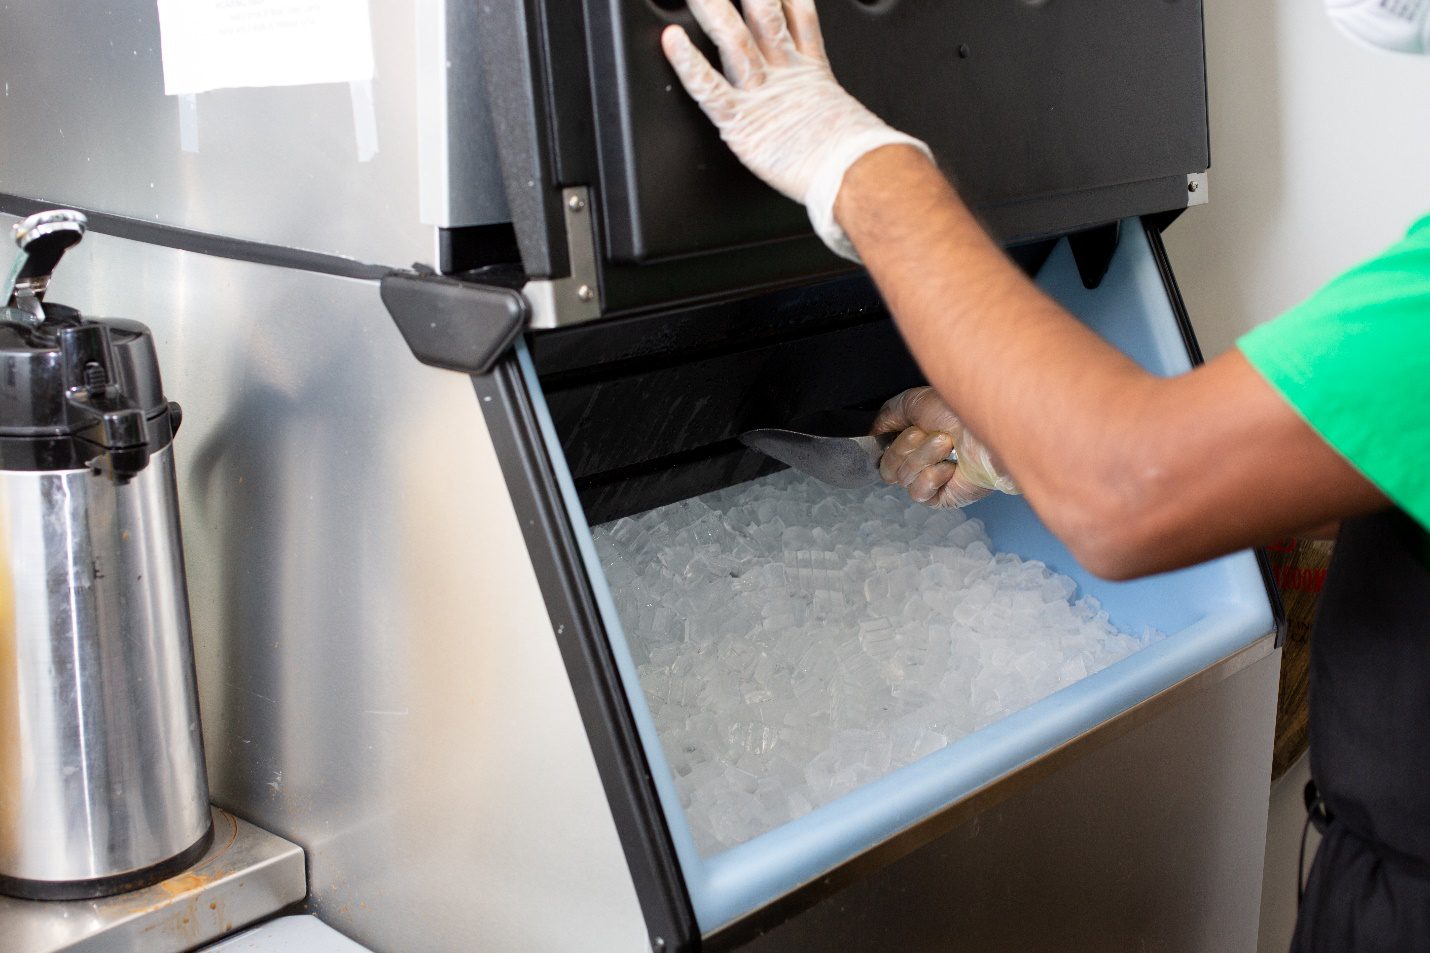 an employee scooping ice from an ice machine